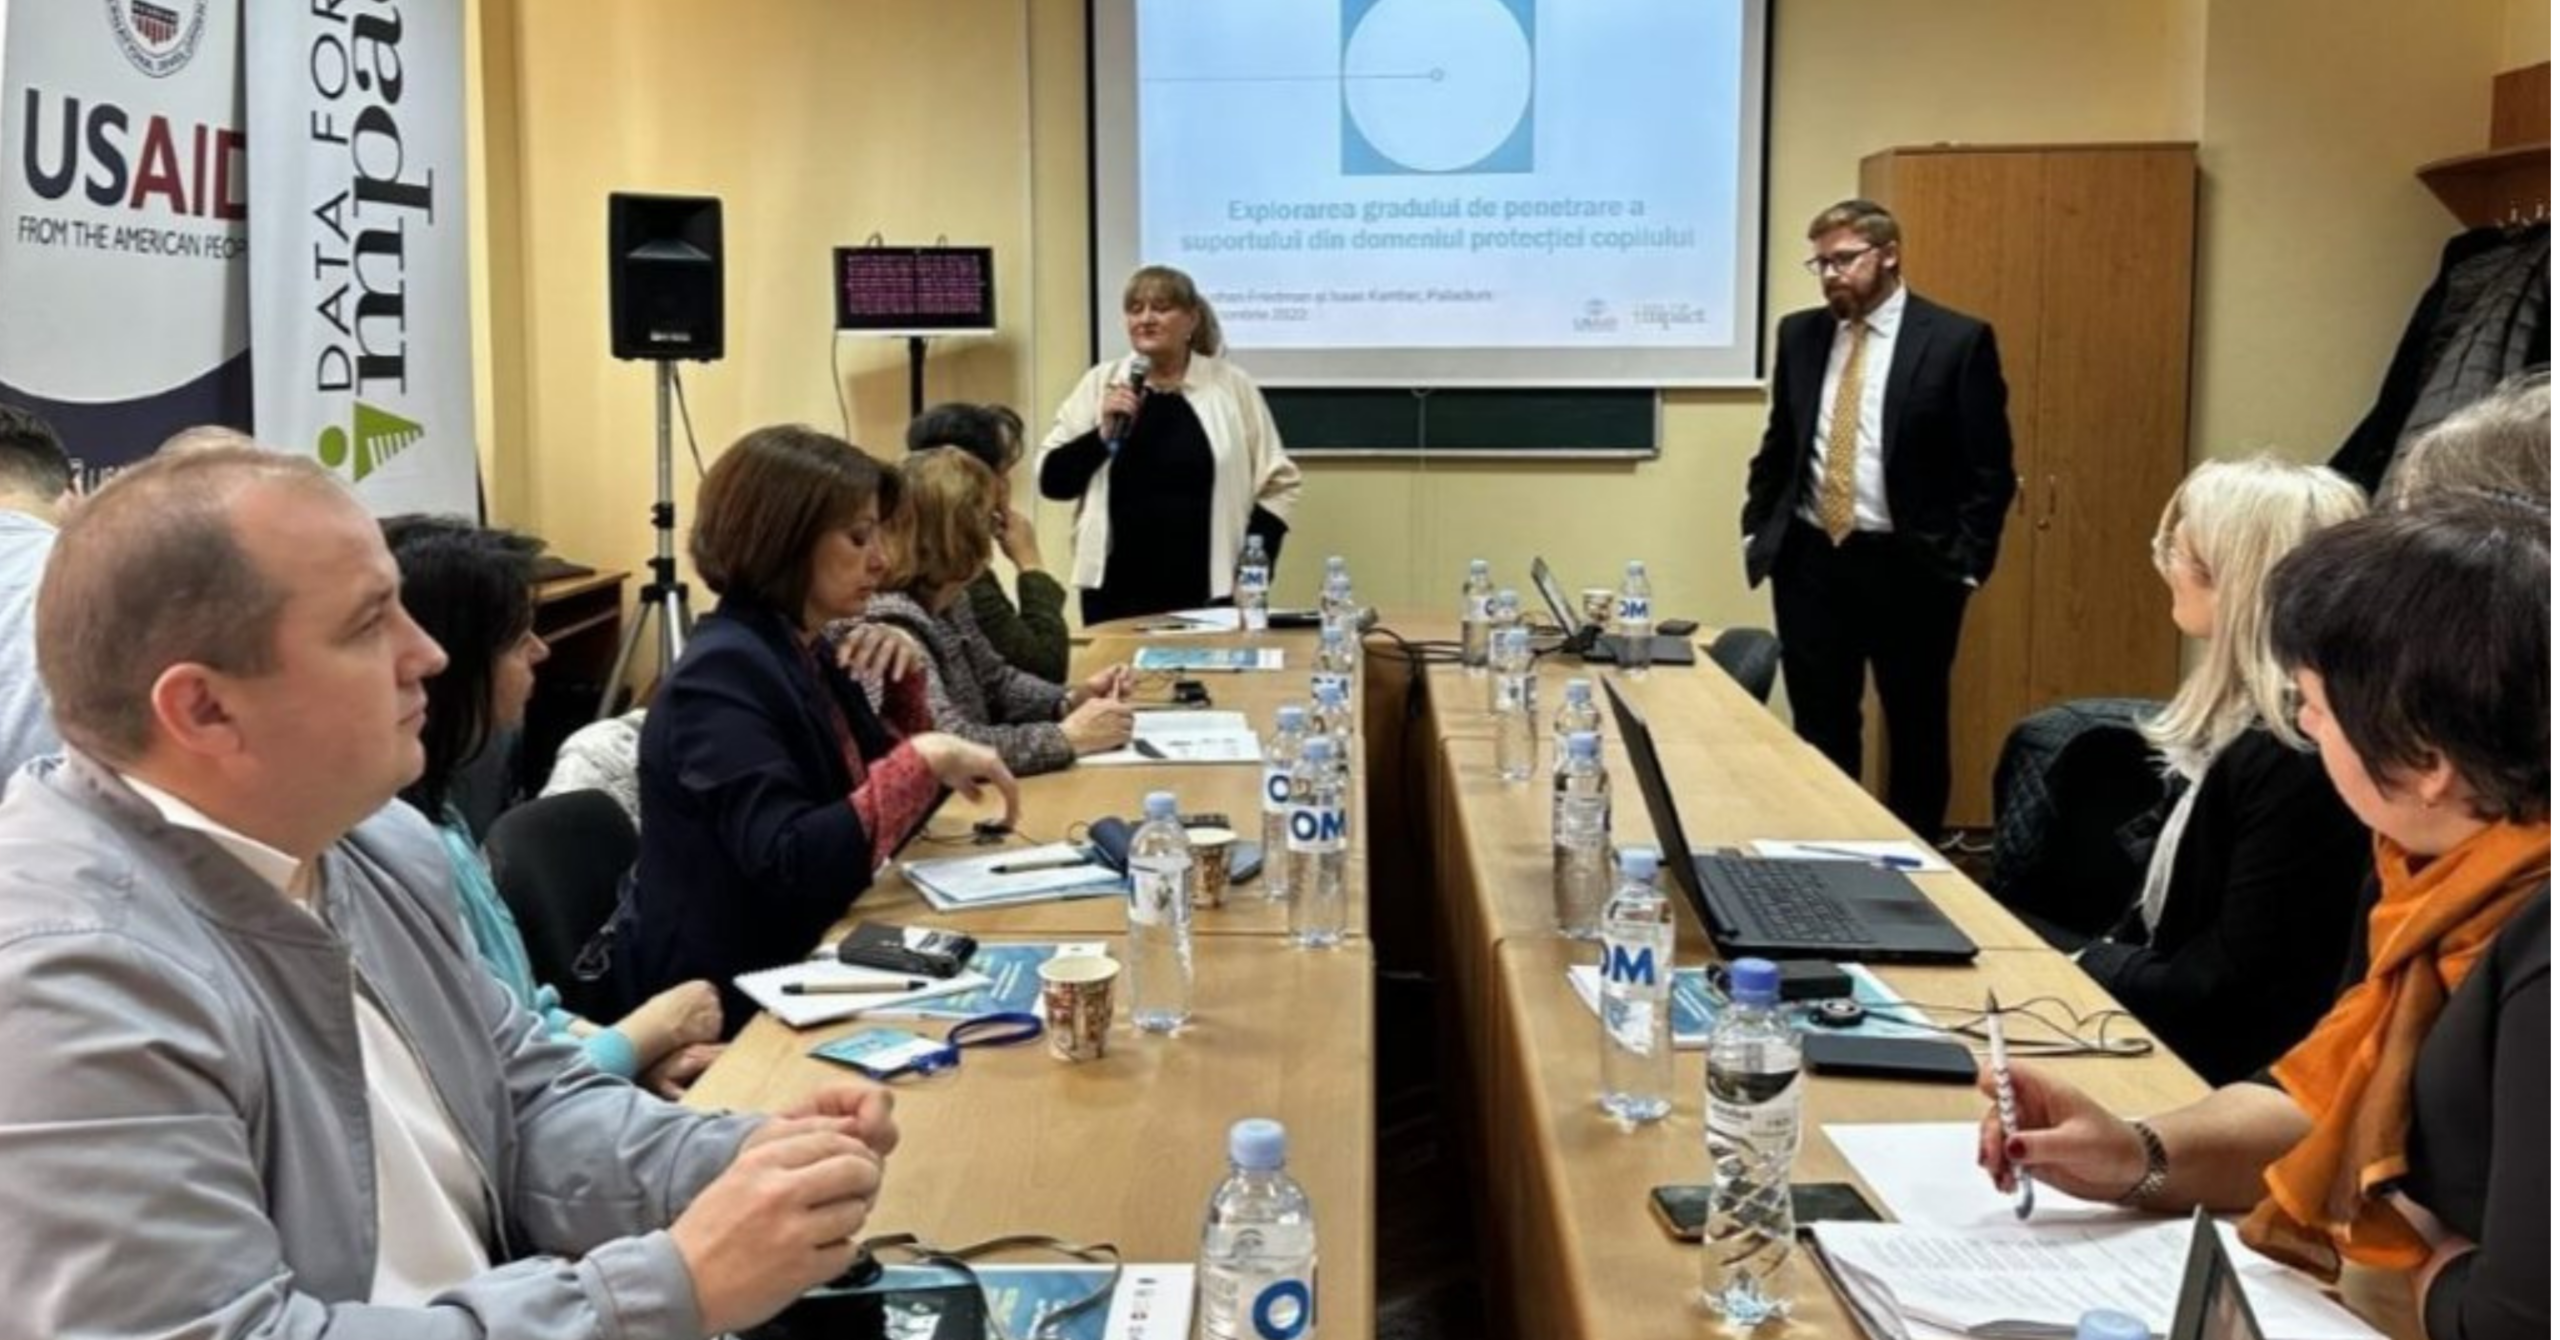 Workshop Helps Social Workers in Moldova Apply Ethical Codes and Analytics for Child Protection Work